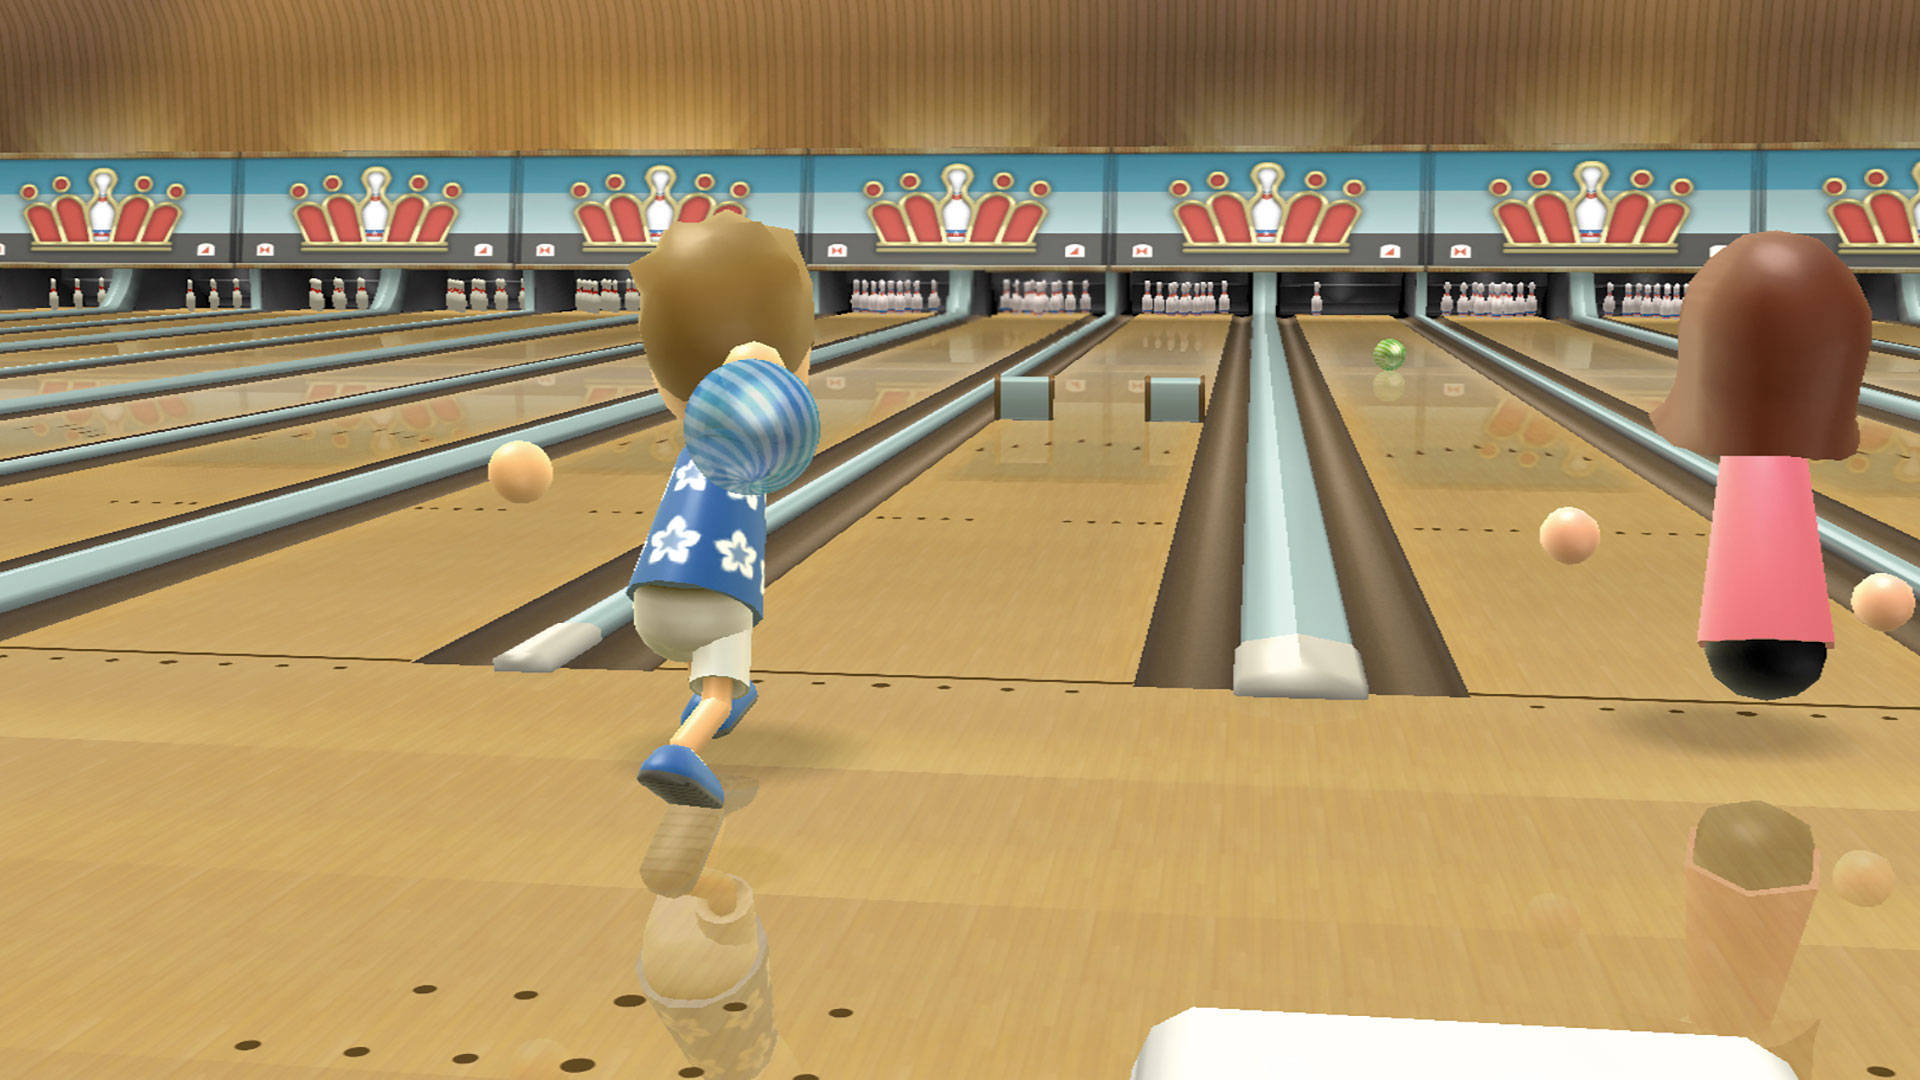 Download Wii Sports Resort Bowling Game Wallpaper Wallpapers